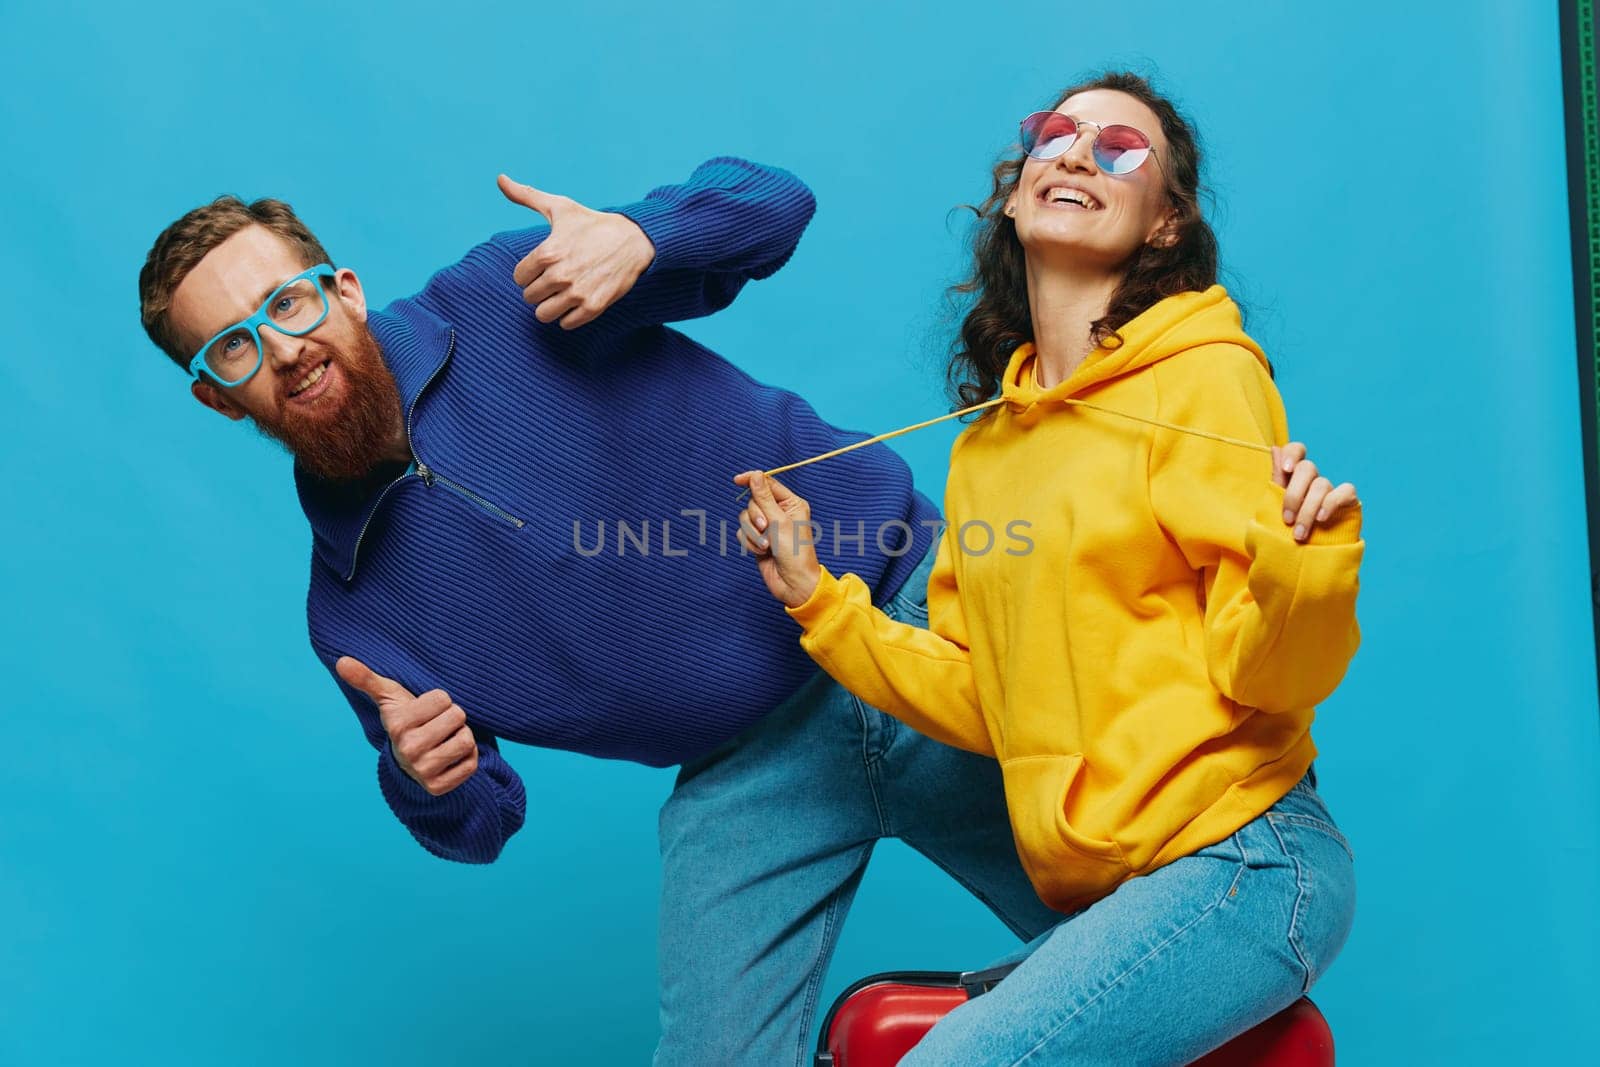 Woman and man smile sitting on suitcase with red suitcase smile, on blue background, packing for trip, family vacation trip. High quality photo